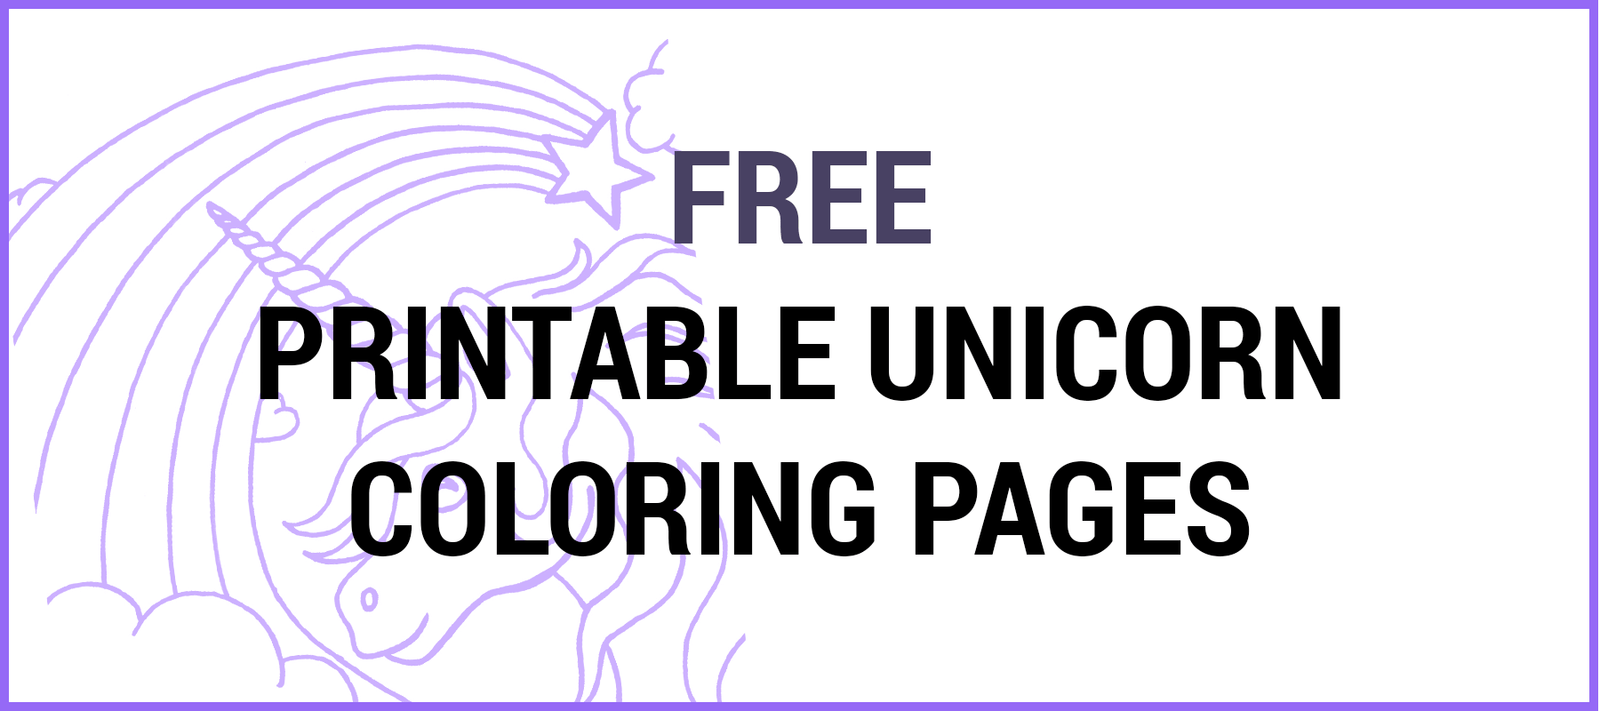 Unicorn Coloring Pages To Print